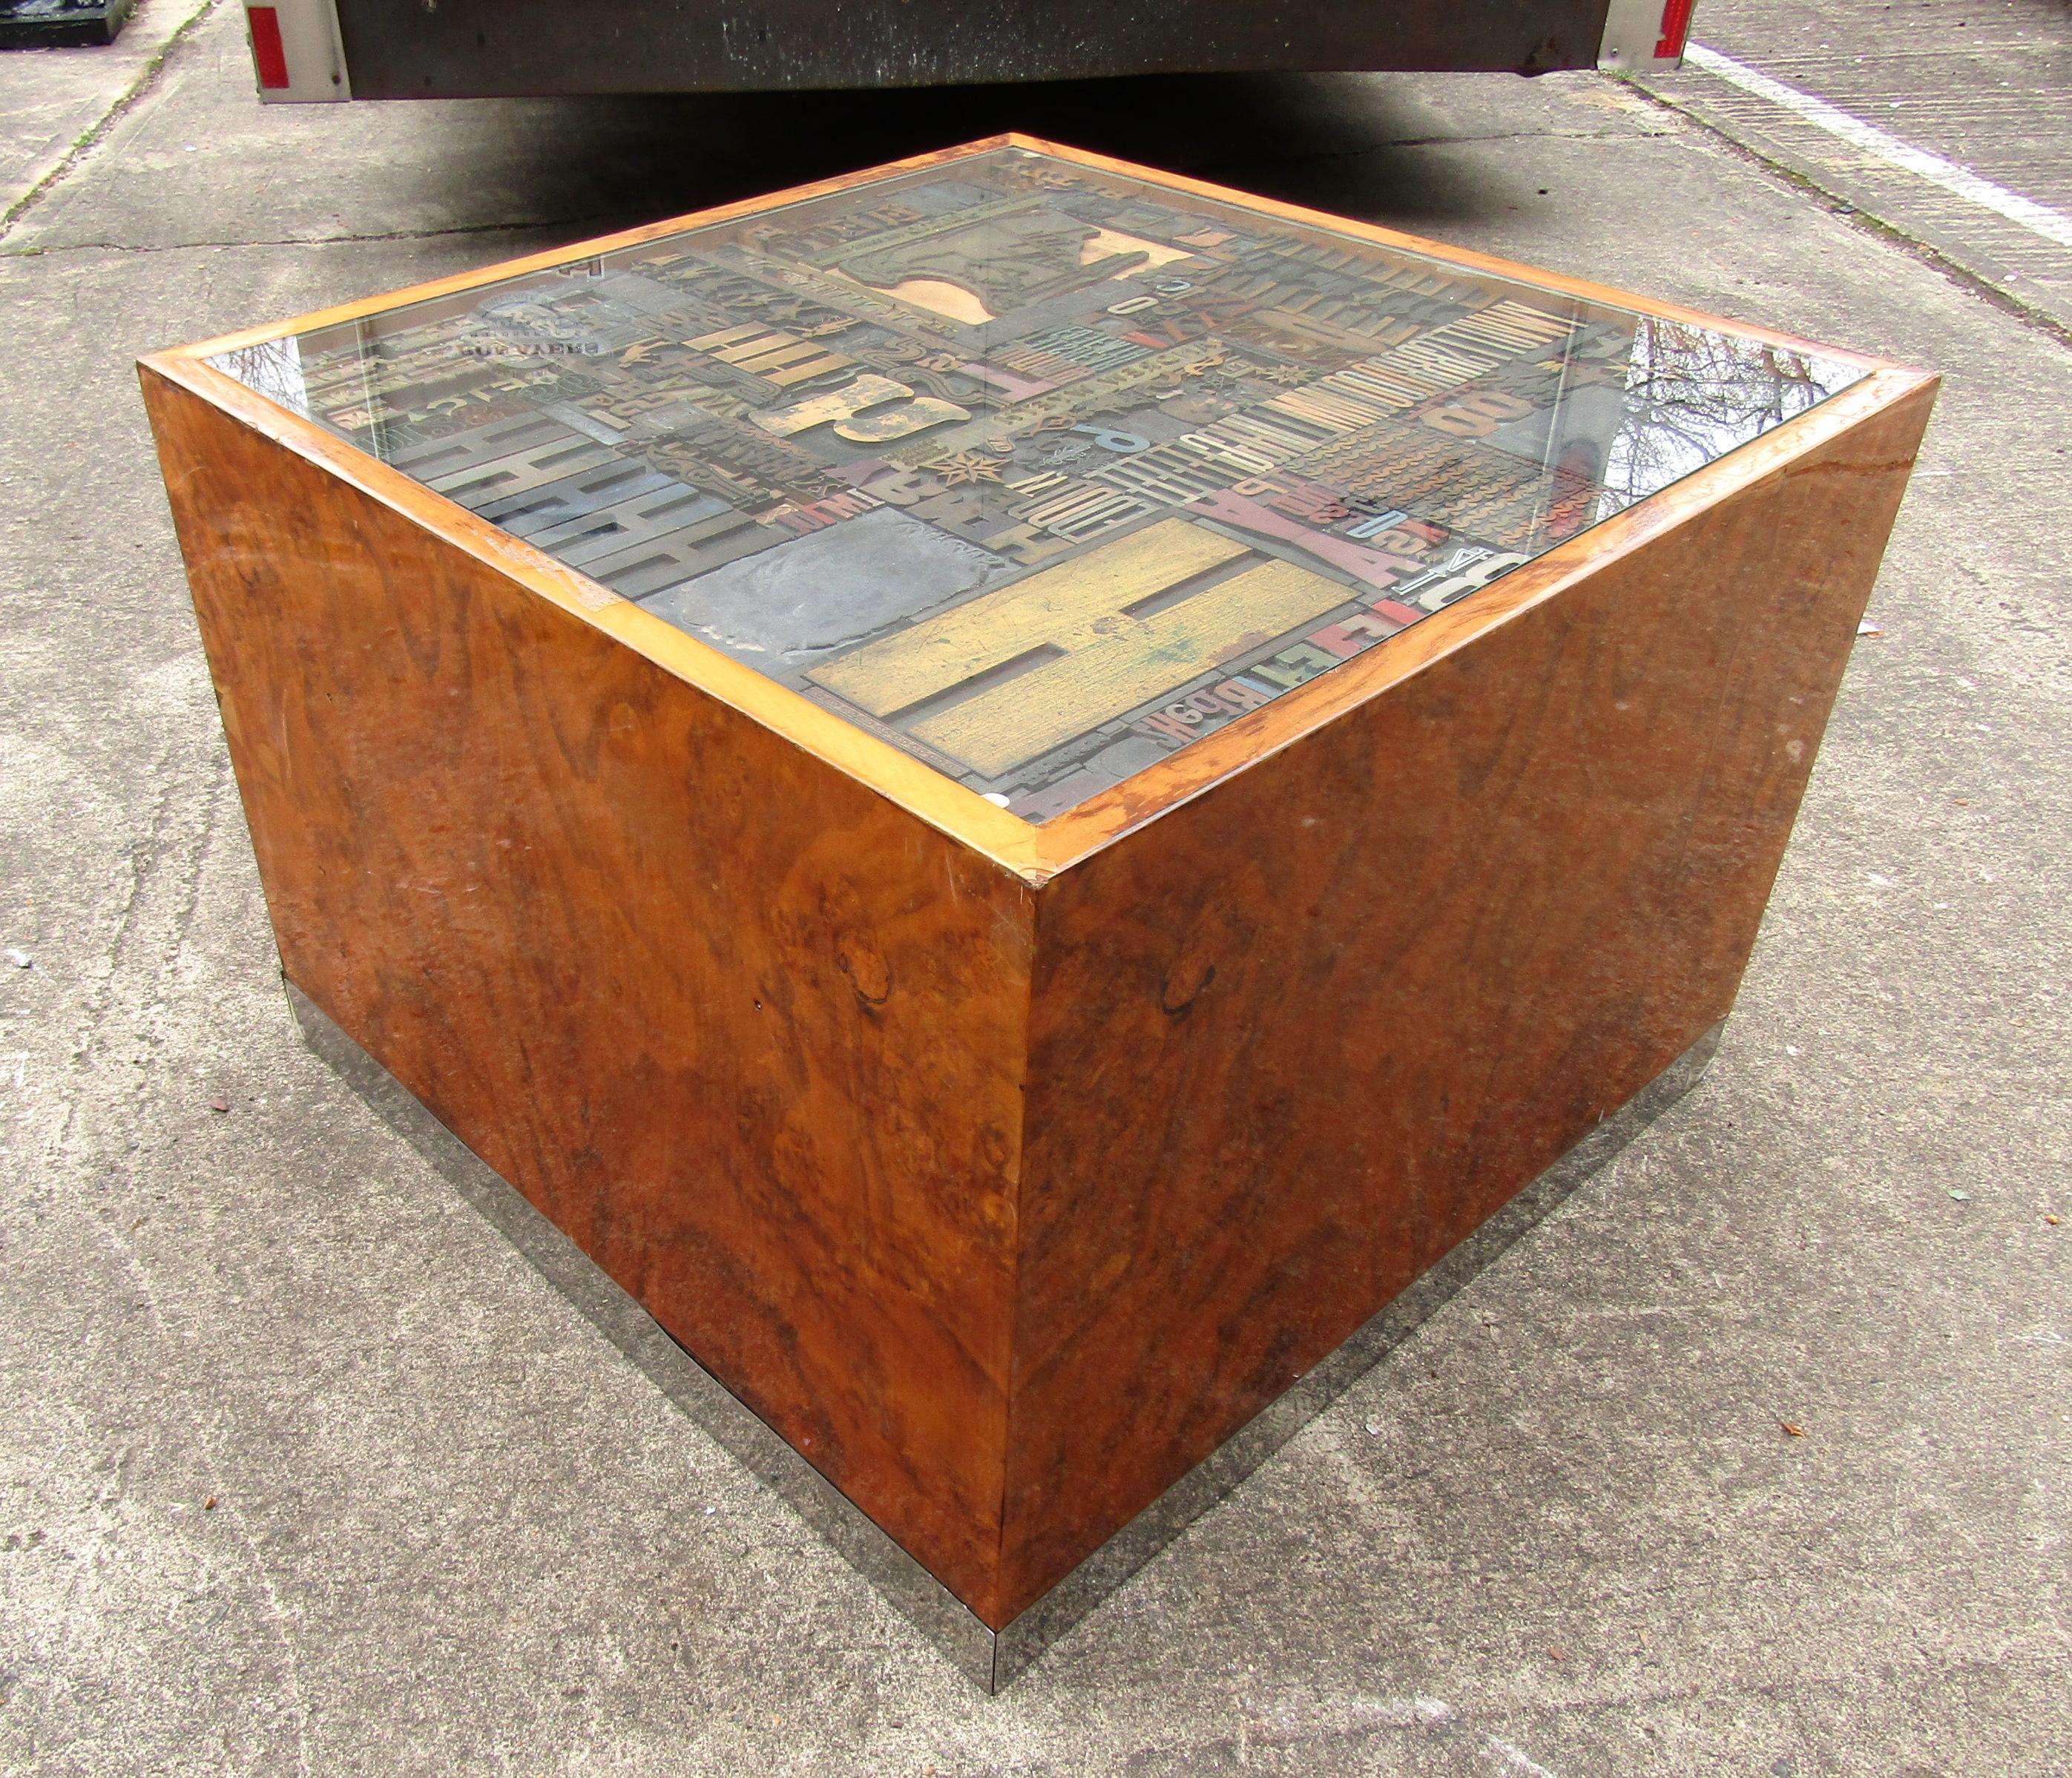 Mid-Century Modern burl wood cube coffee table featuring unique wood tile designs inside a glass-top.

(Please confirm item location - NY or NJ - with dealer).